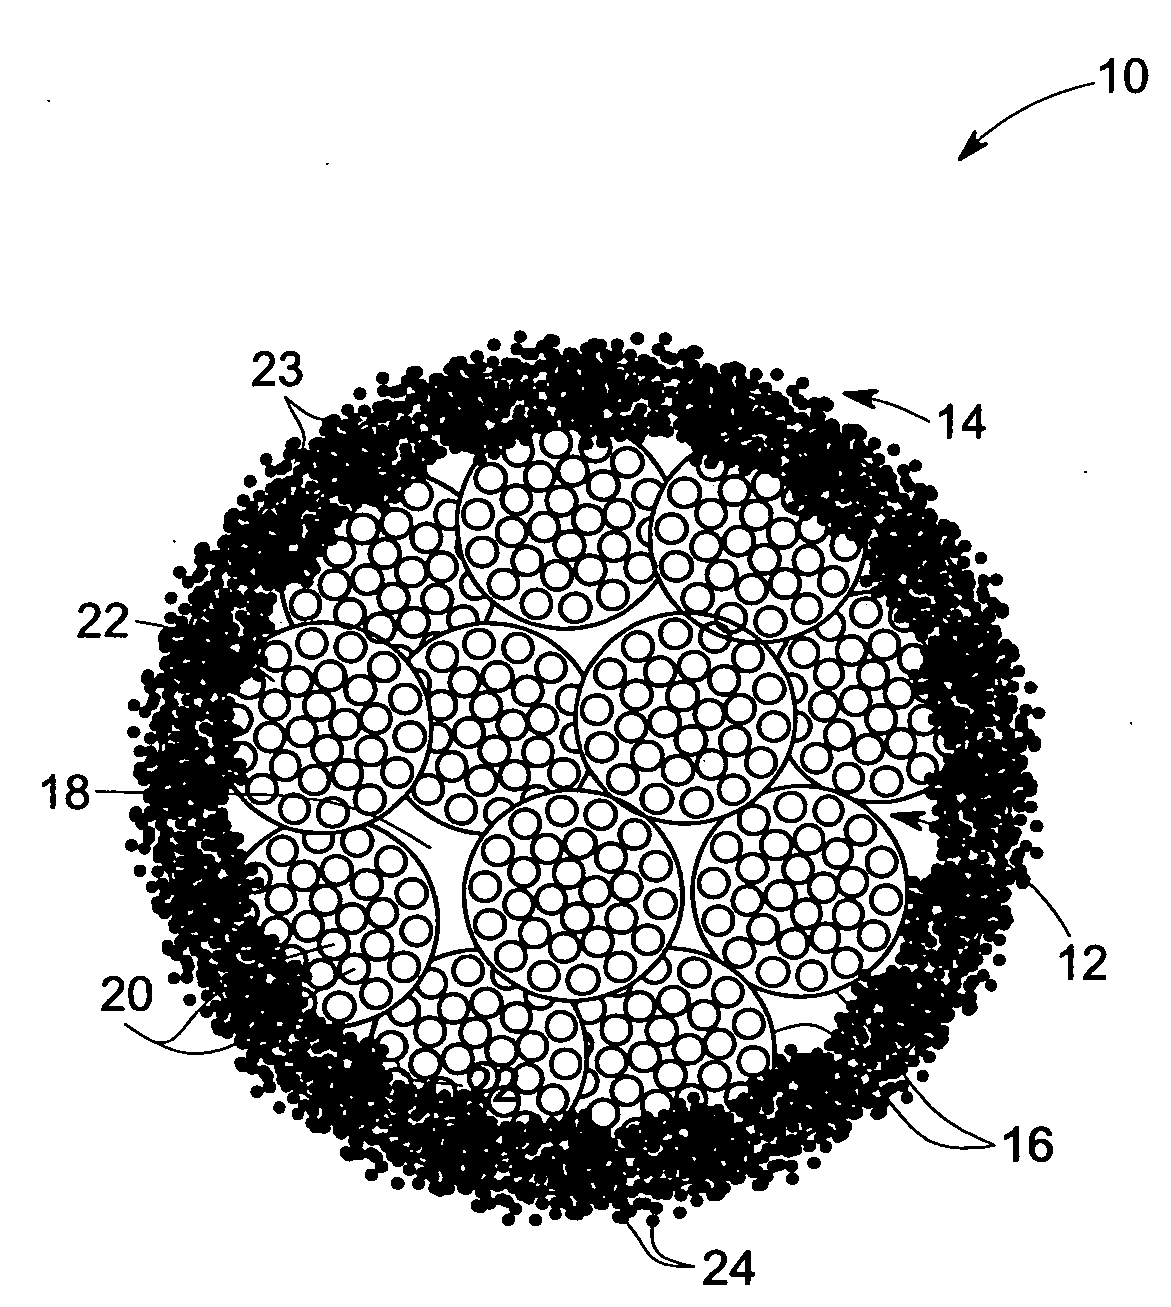 Core-shell ceramic particulate and method of making